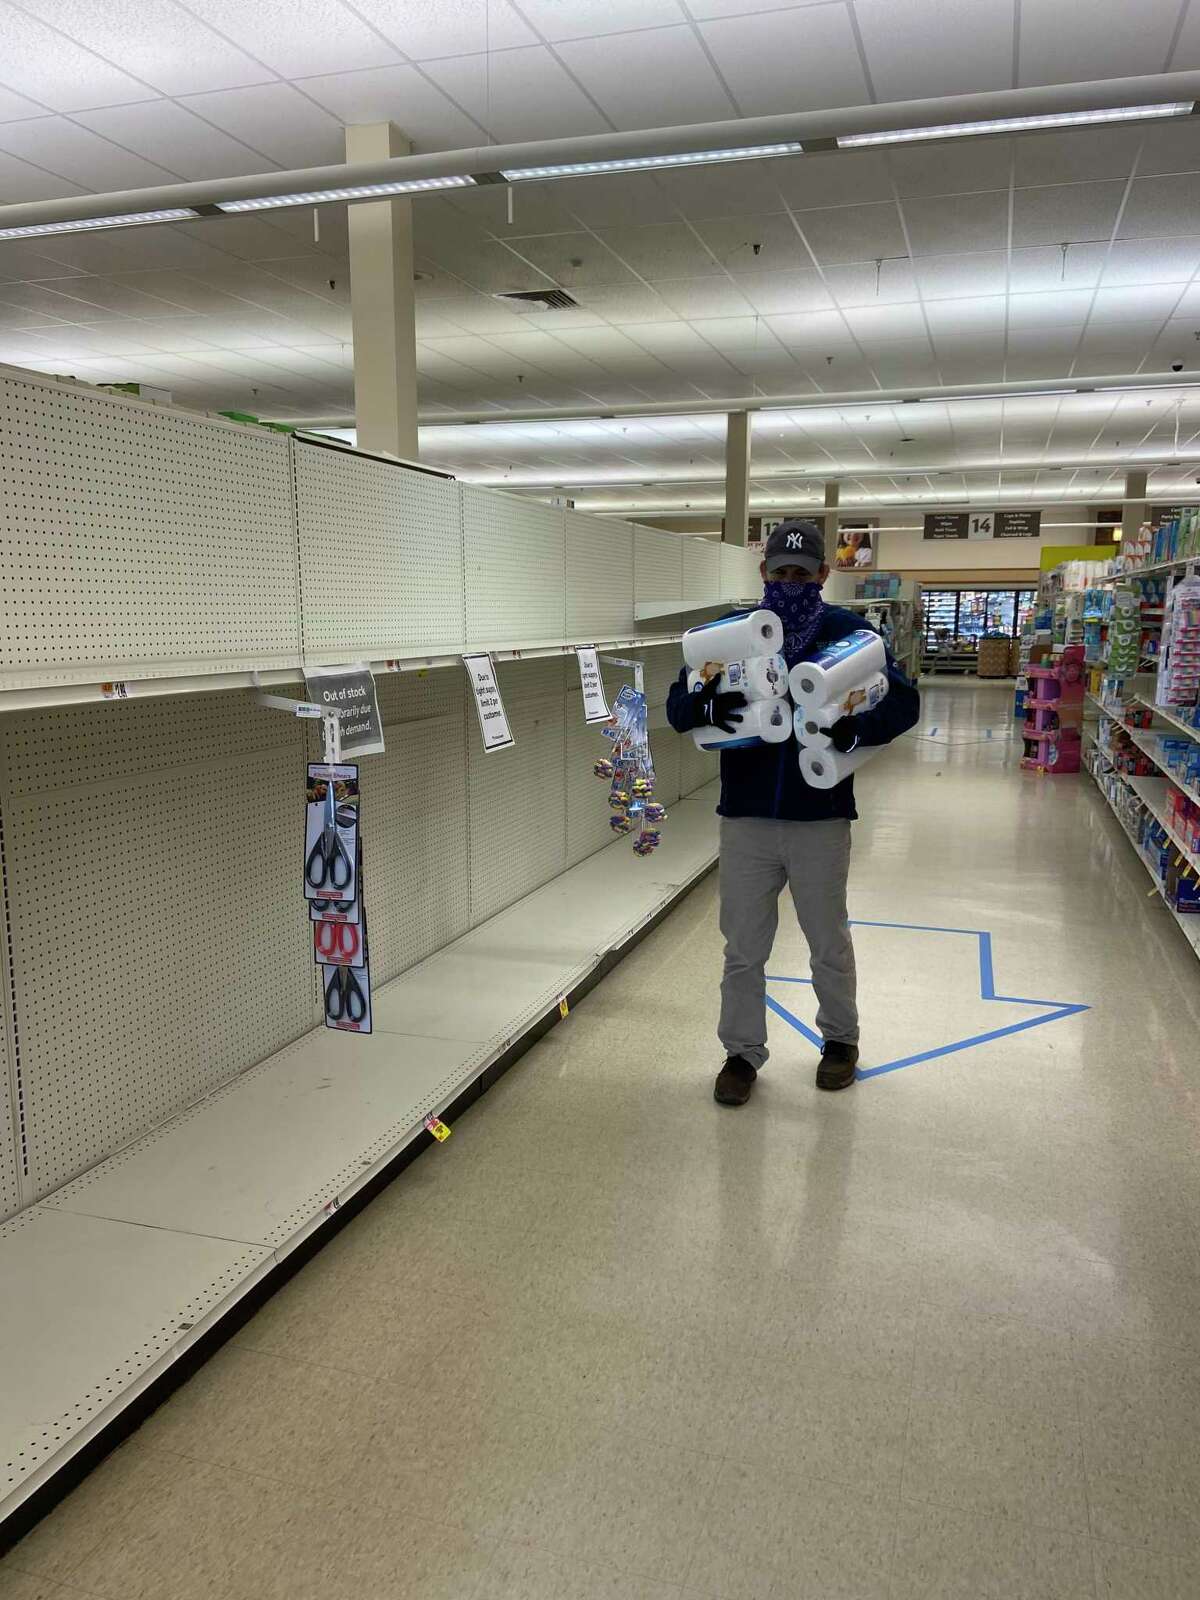 A masked customer is stocking up on needed paper supplies amid the nearly empty supermarket shelves.